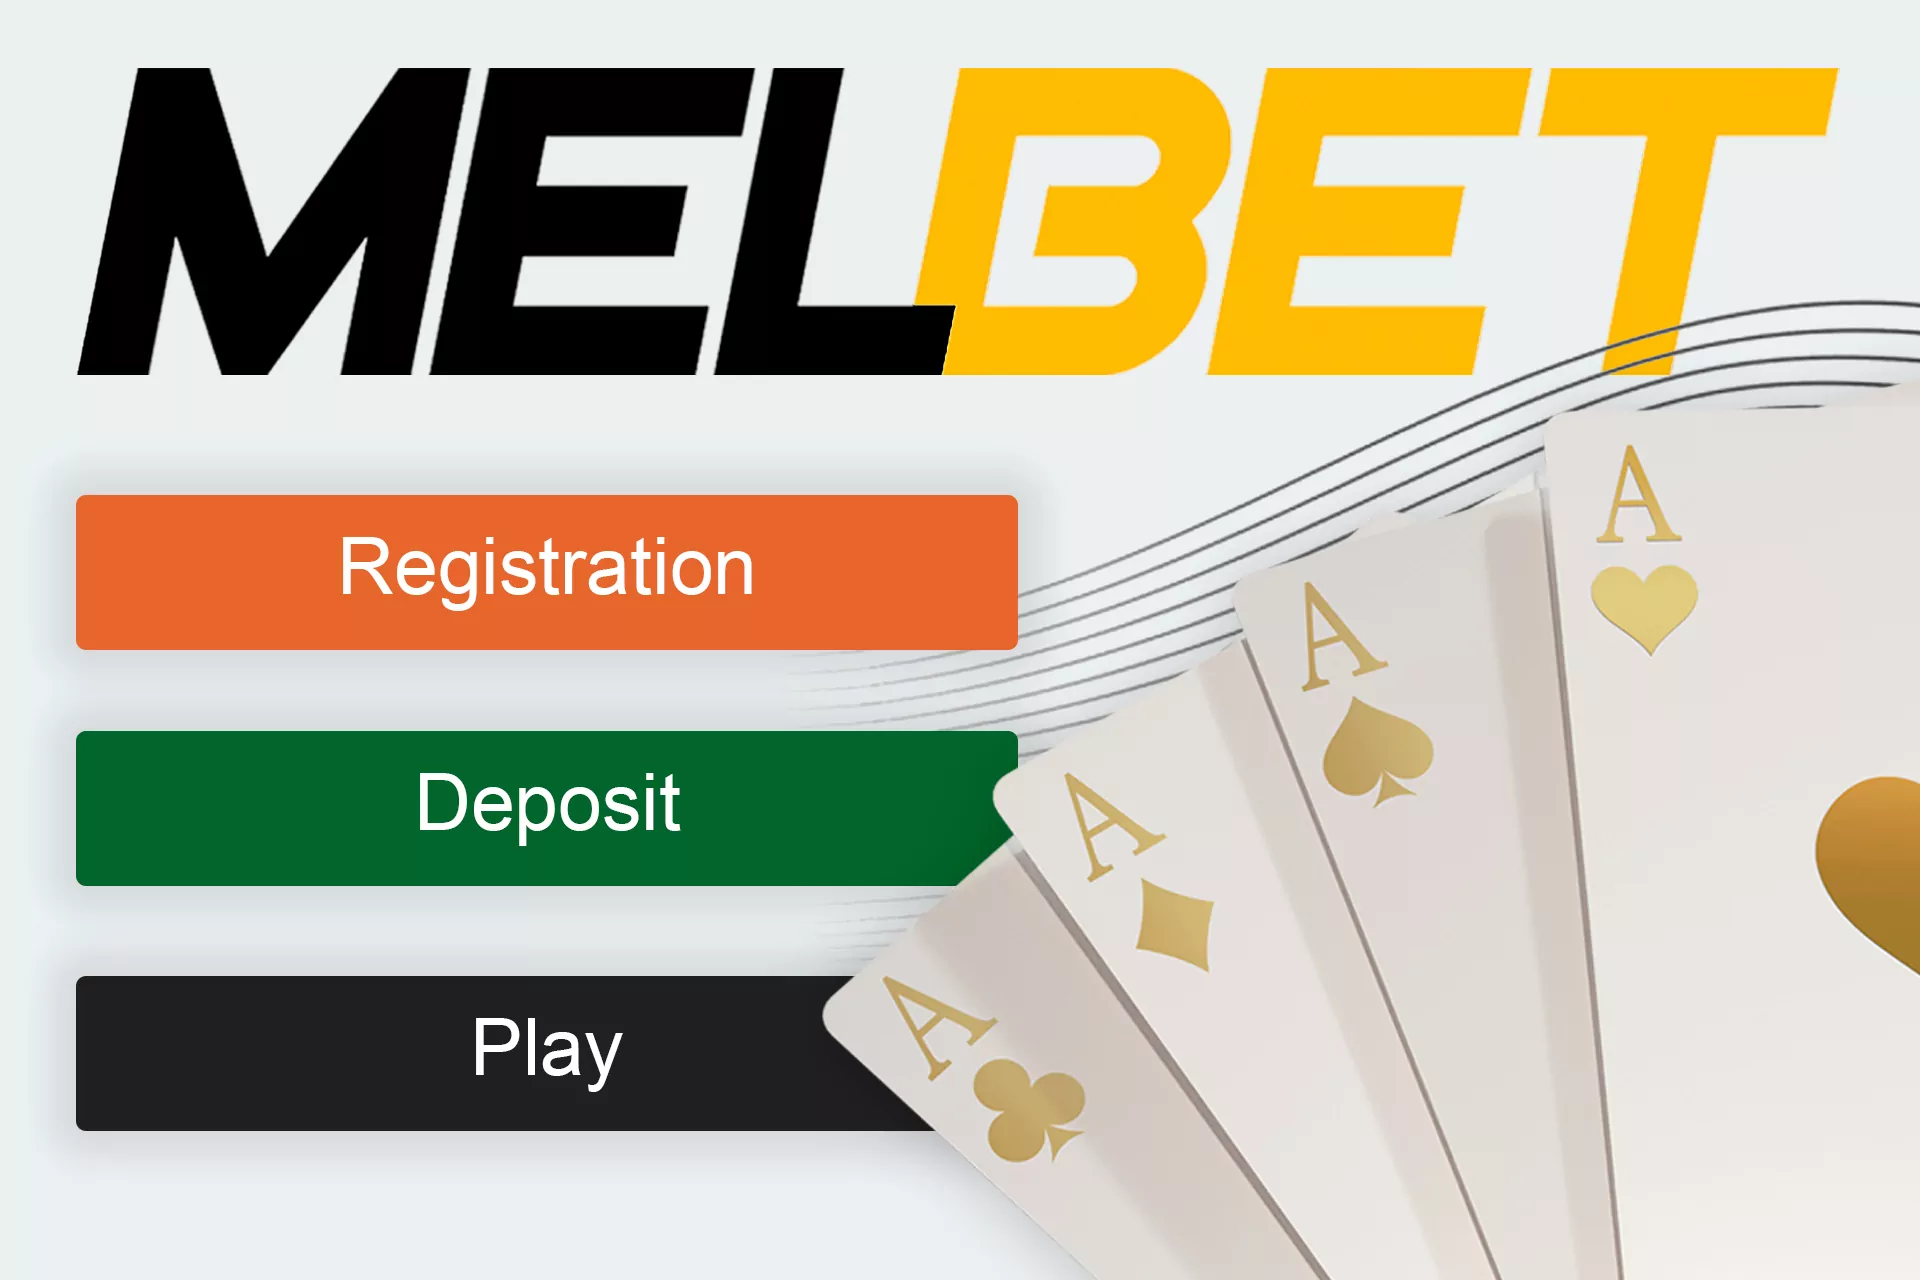 Create an account and make a deposit to start playing casino games.